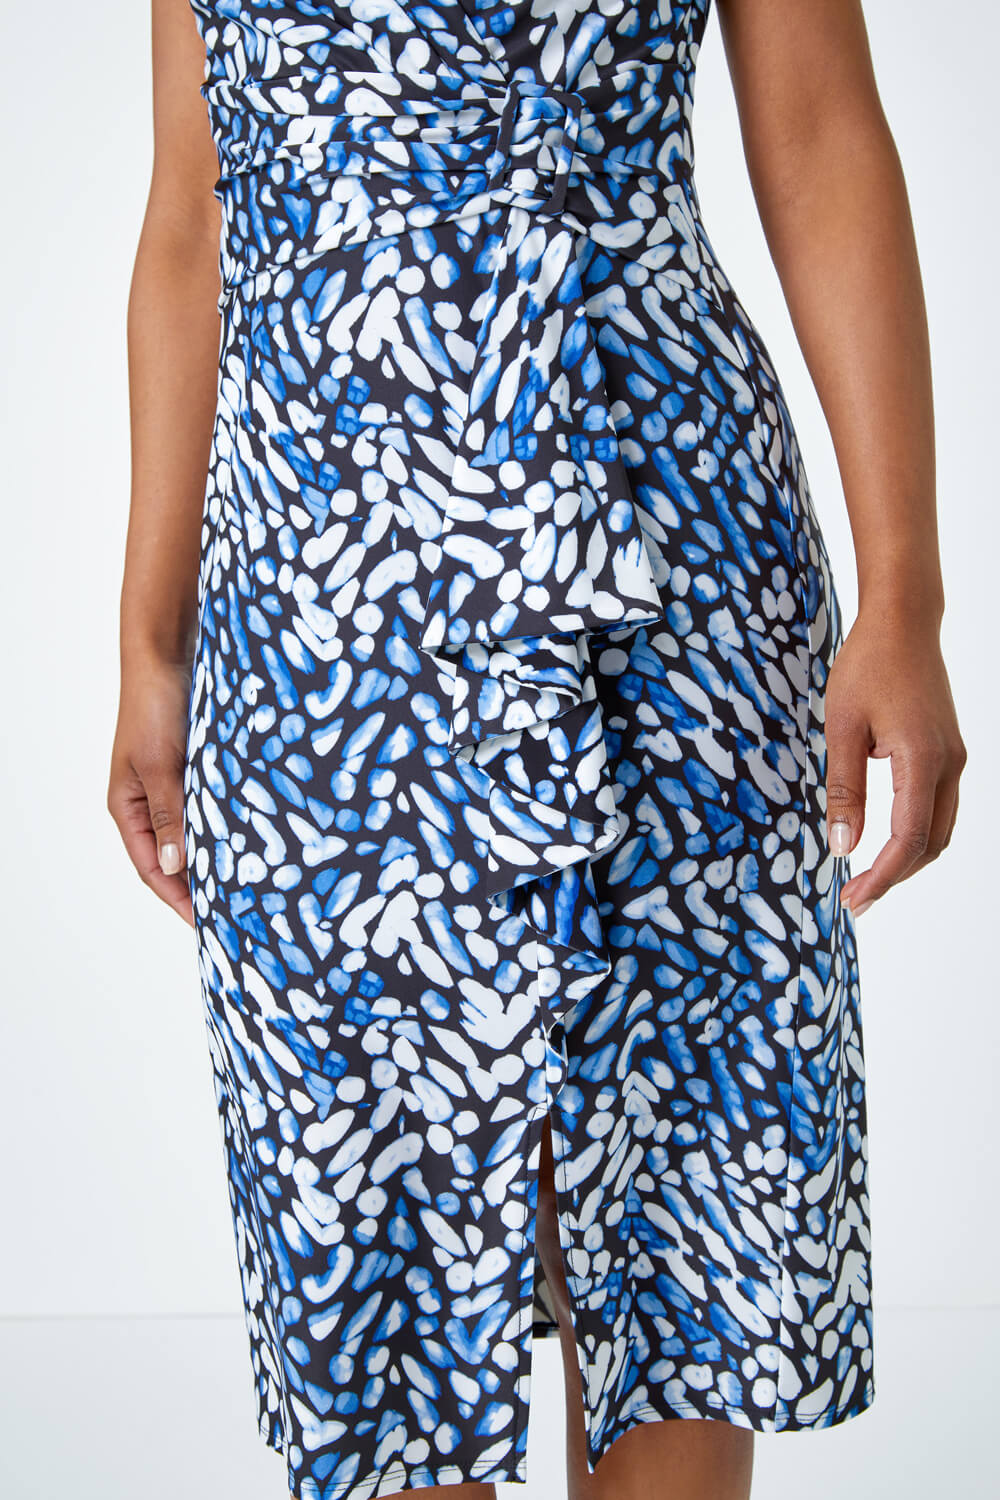 Blue Abstract Print Buckle Detail Midi Stretch Dress, Image 5 of 5